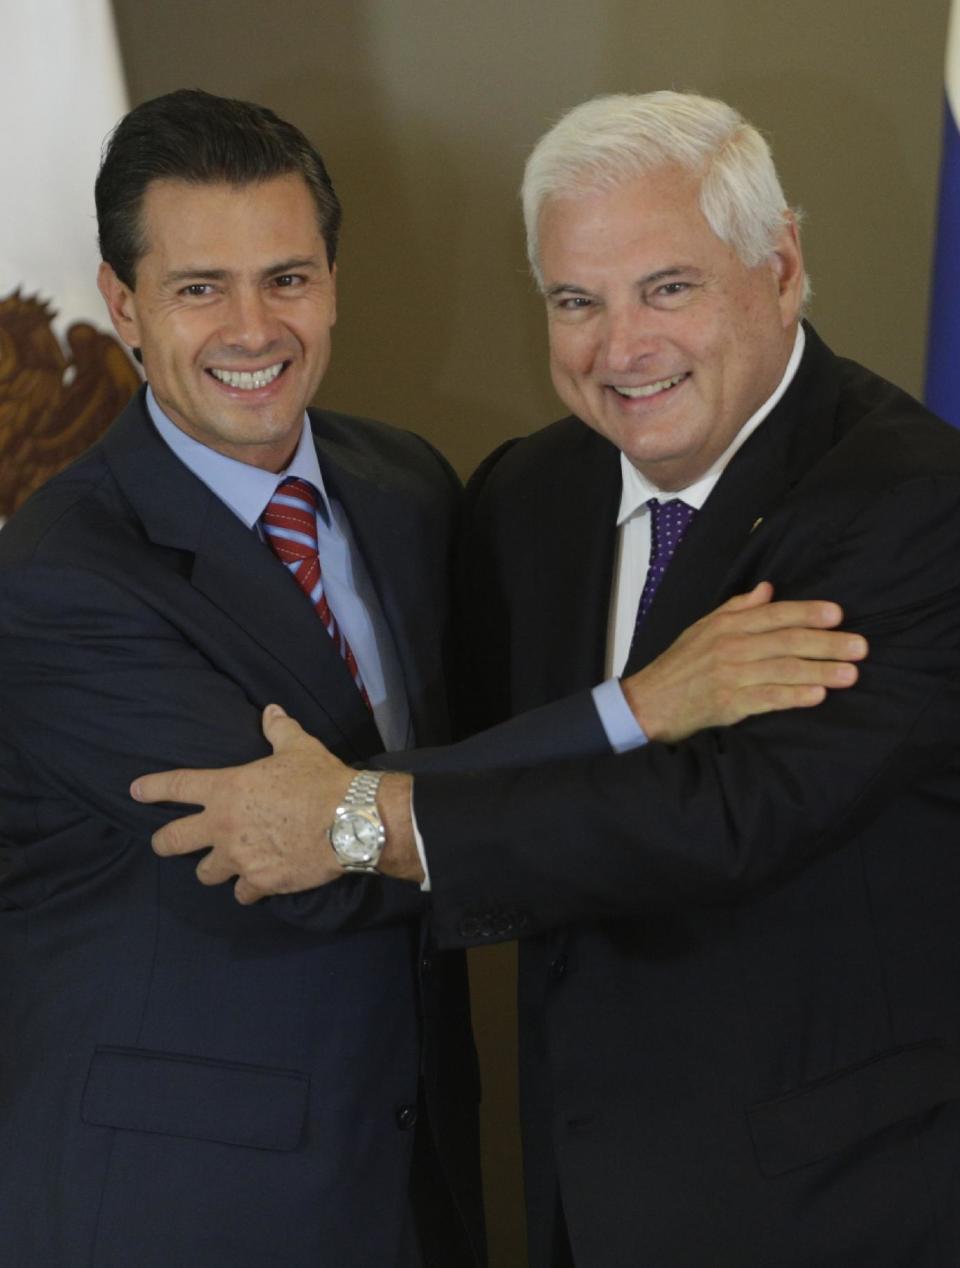 Mexico's President Enrique Pena Nieto, left, and Panama's President Ricardo Martinelli embrace after signing a Free Trade Agreement between both countries during the last day of the World Economic Forum on Latin America in Panama City, Thursday, April 3, 2014. (AP Photo/Arnulfo Franco)